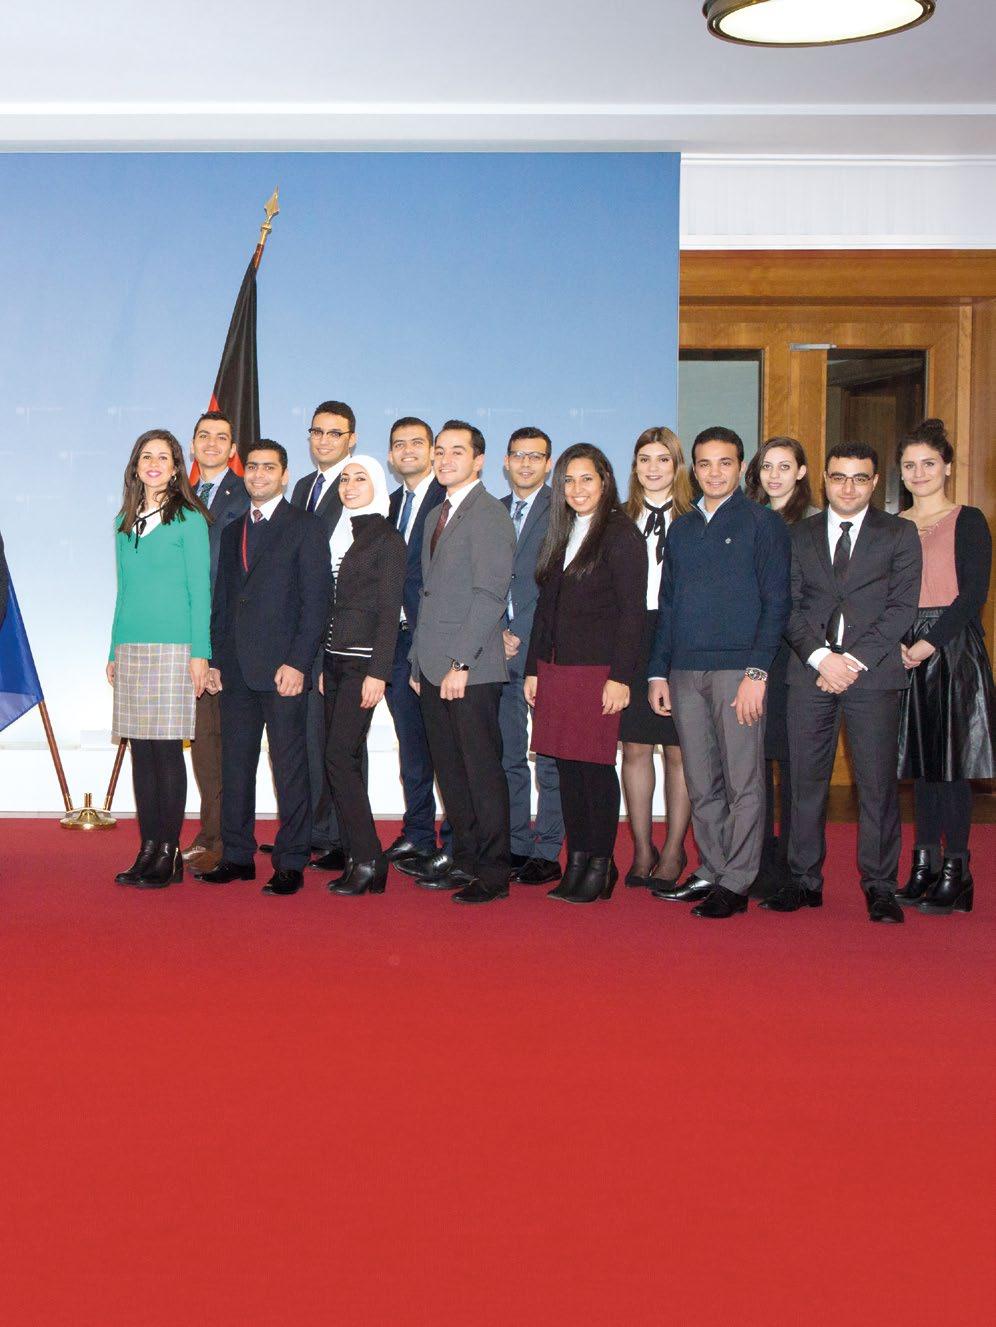 Executive Seminar for Diplomats from Egypt 55 4 th Executive Seminar for Diplomats from Egypt 1 November 29 November 2016 1 st row, from left to right: Tanja Maximow (Programme Assistant), Banan